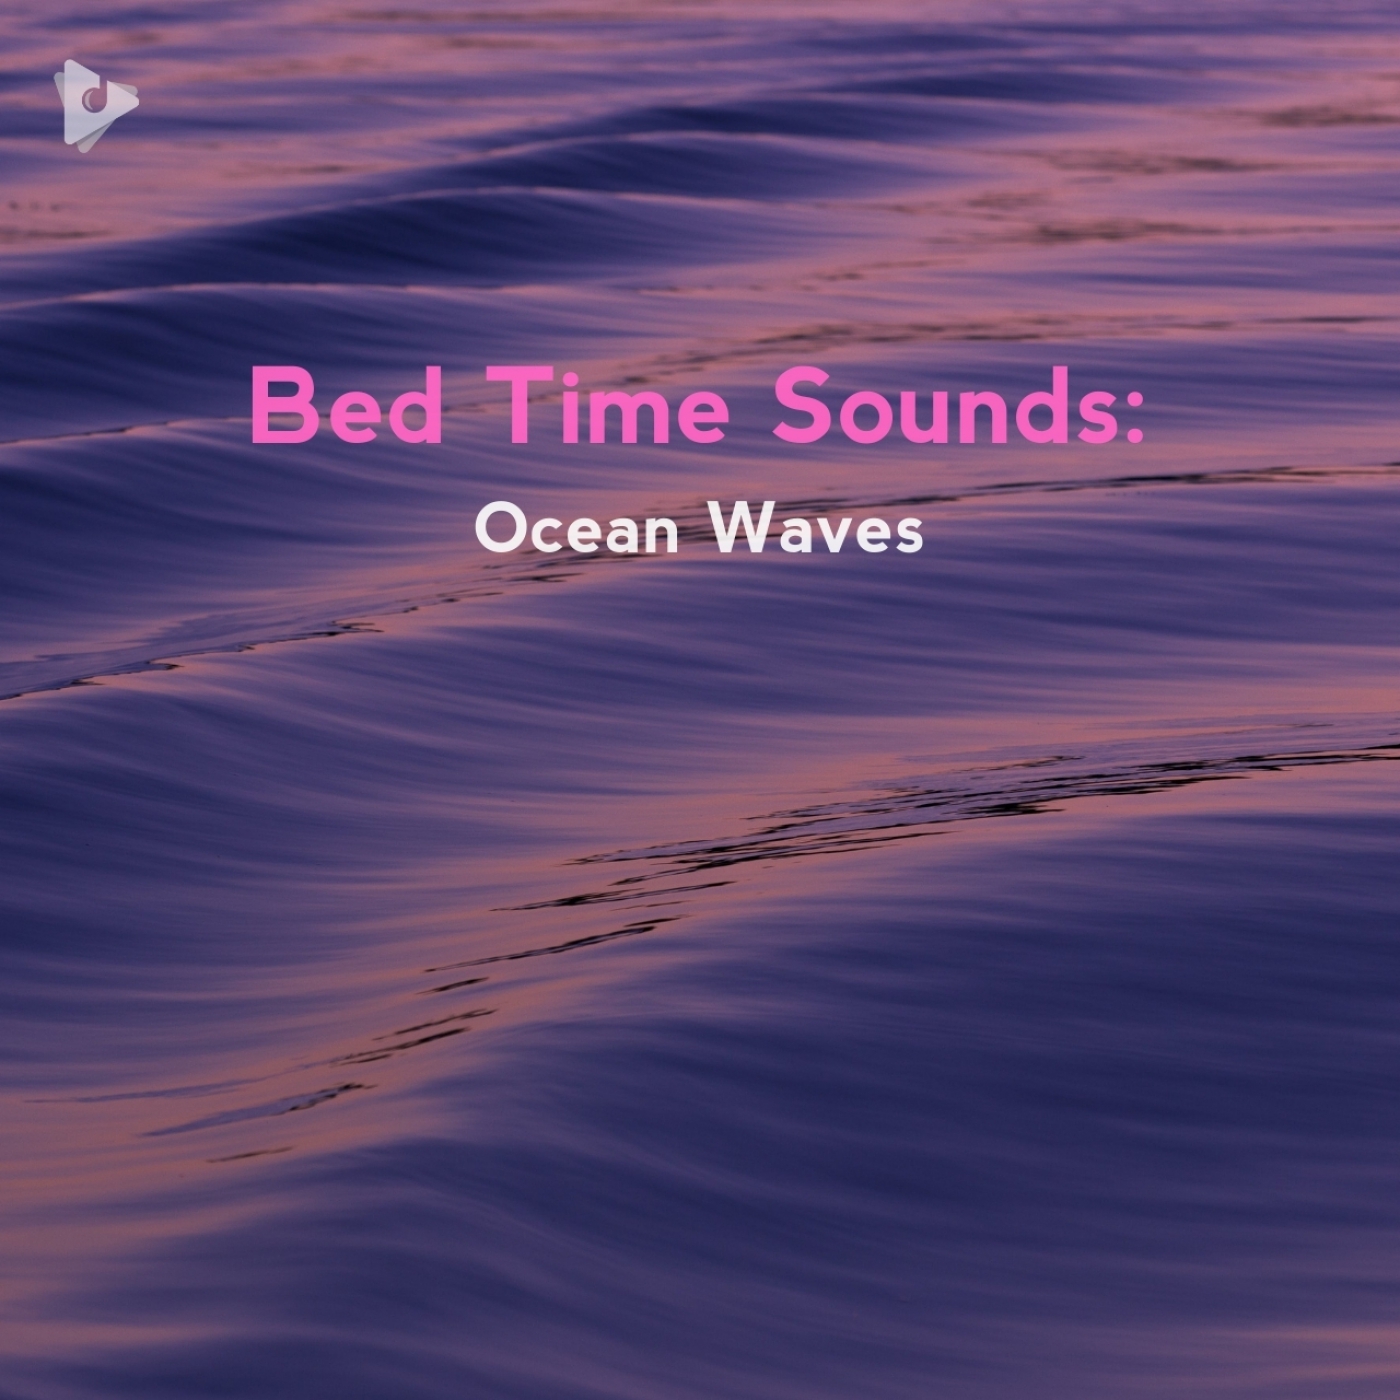 Bed Time Sounds: Ocean Waves